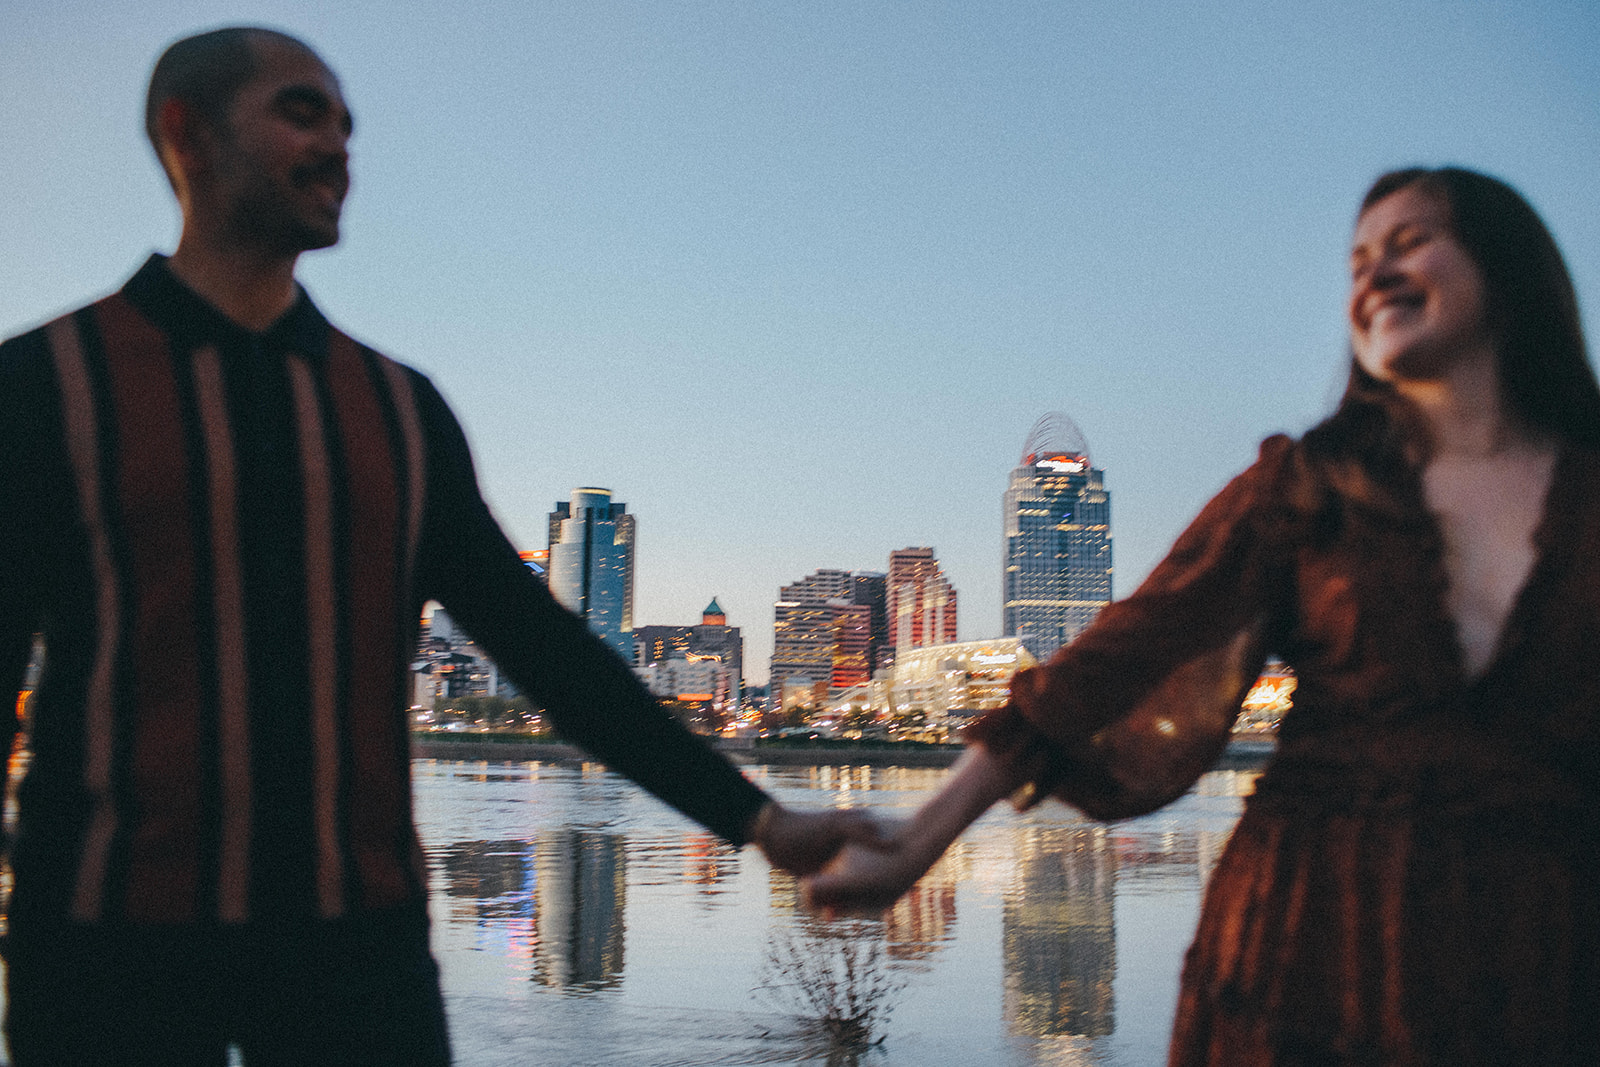 A documentary candid moment between a couple as they walk away from the Ohio River and downtown Cincinnati